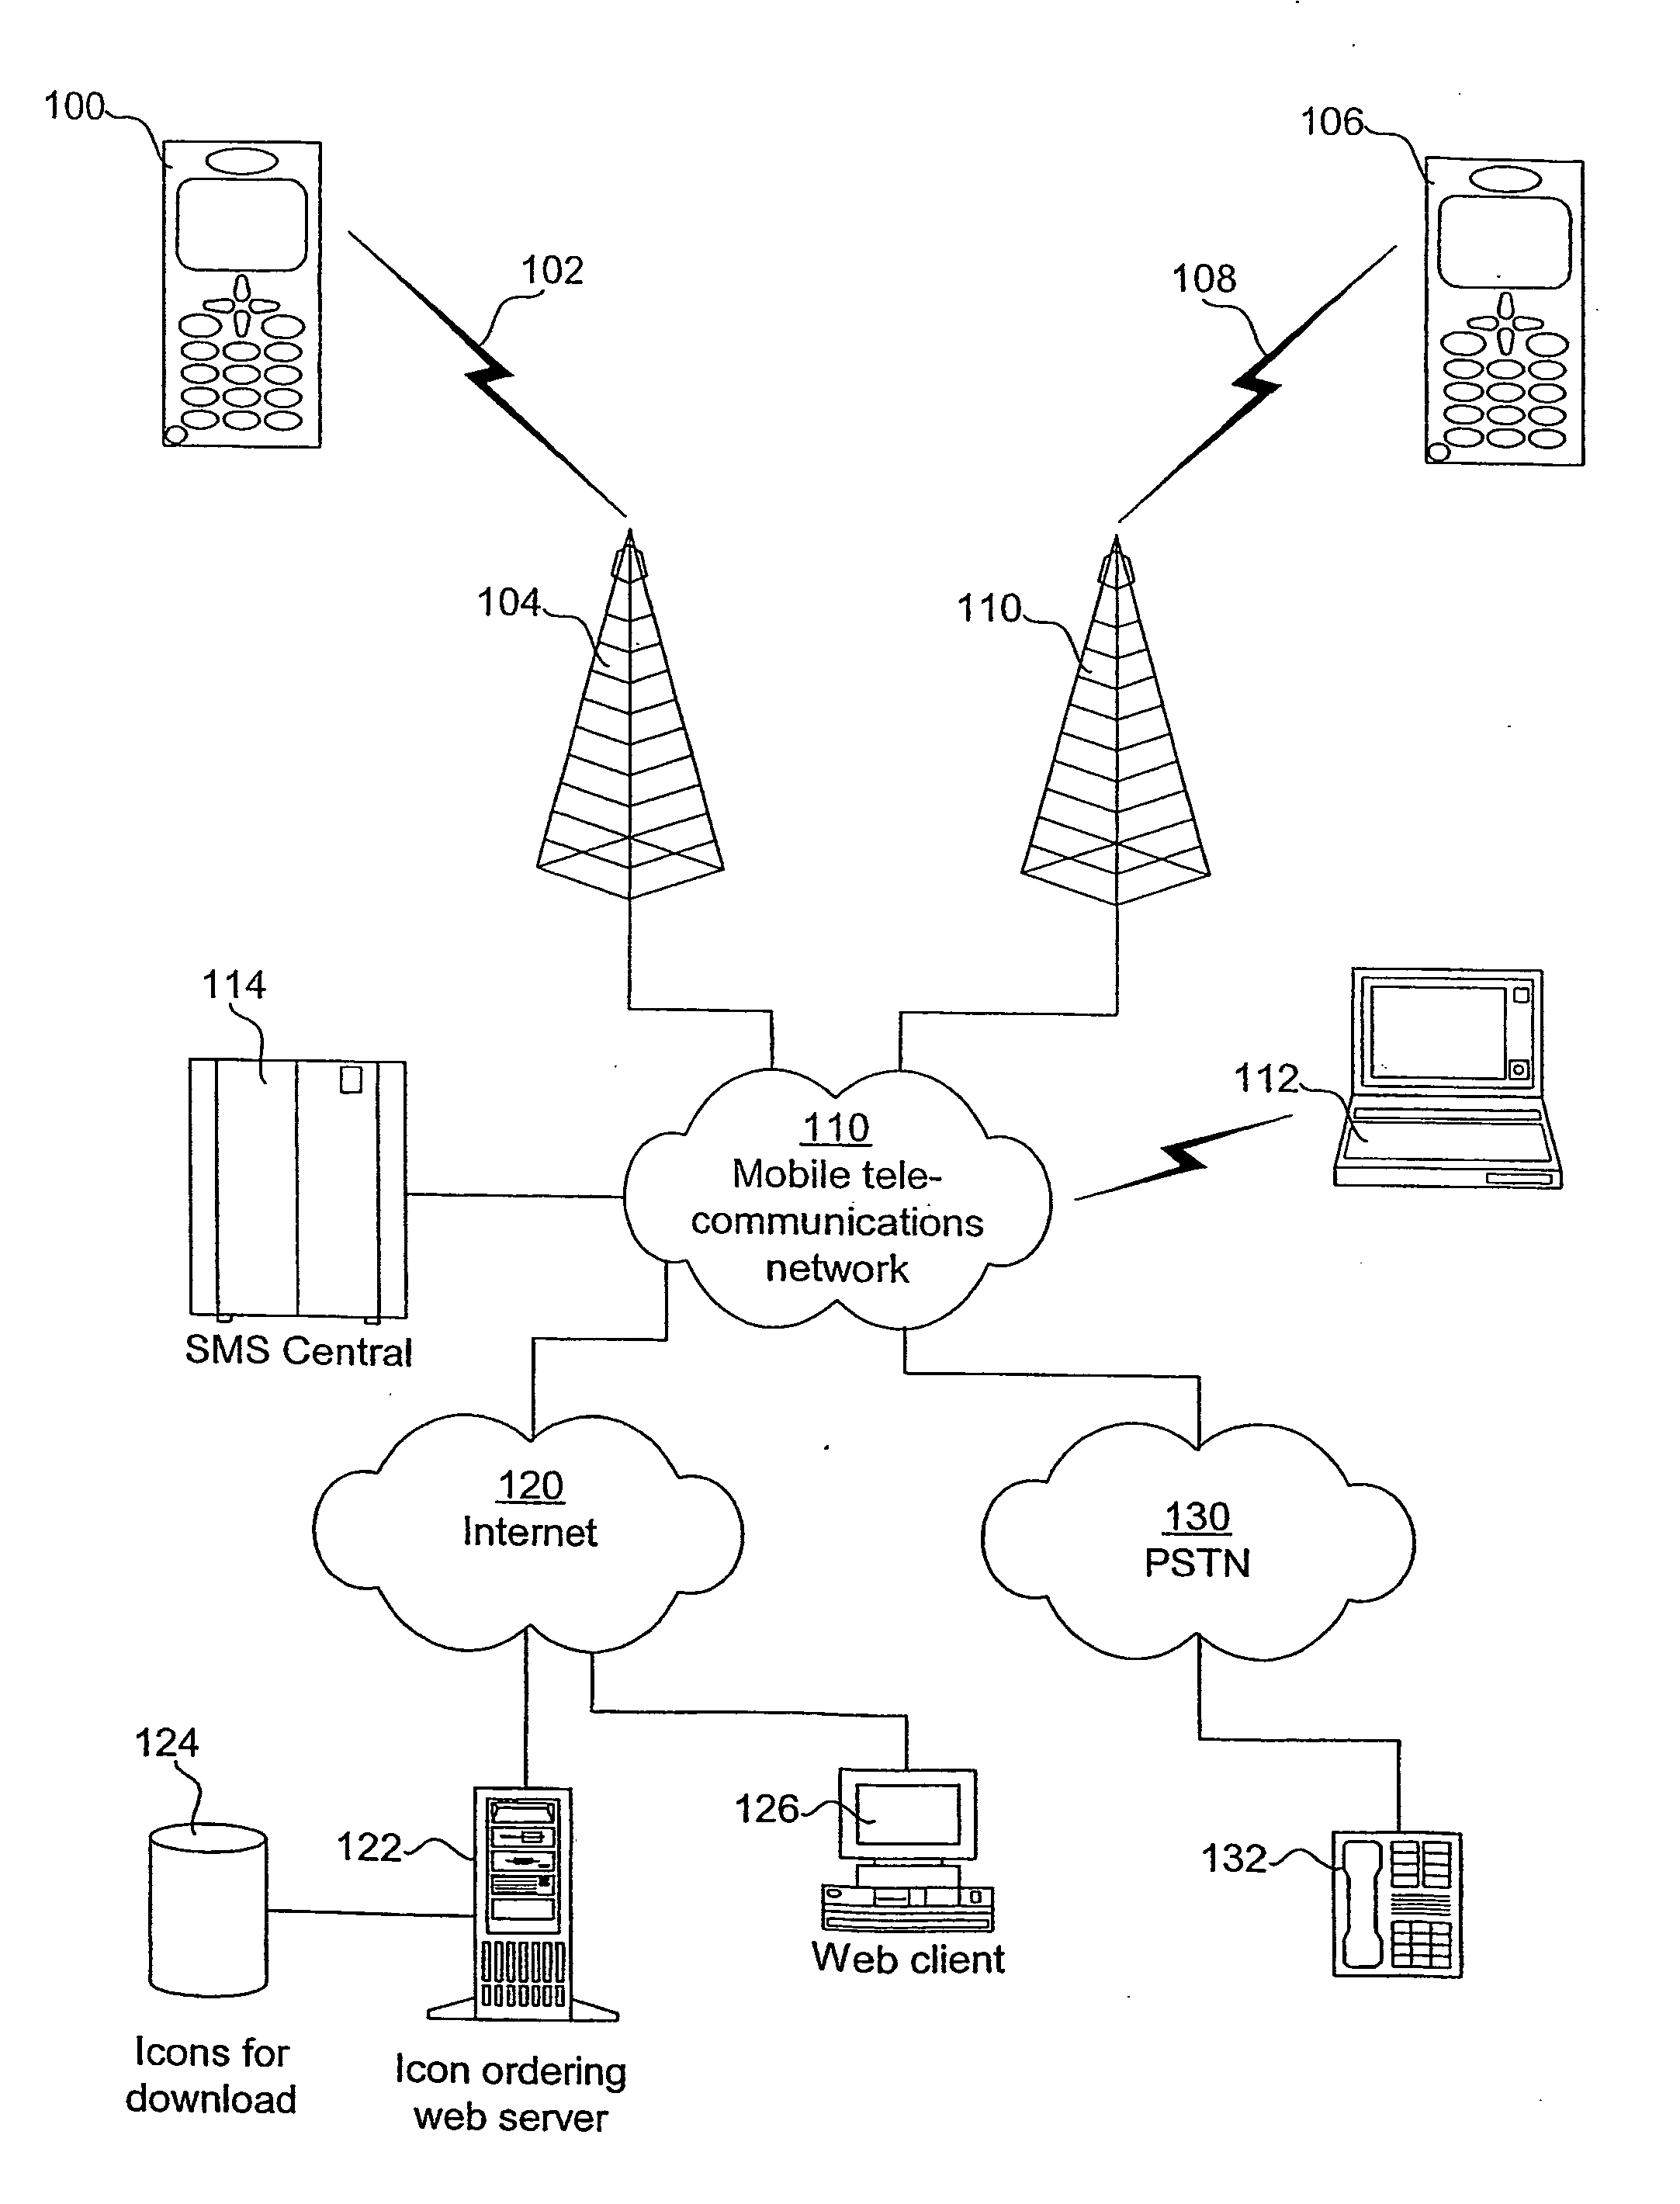 Communication apparatus and a method of indicating receipt of an electronic message, and a server, a method and a computer program product for providing a computerized icon ordering service